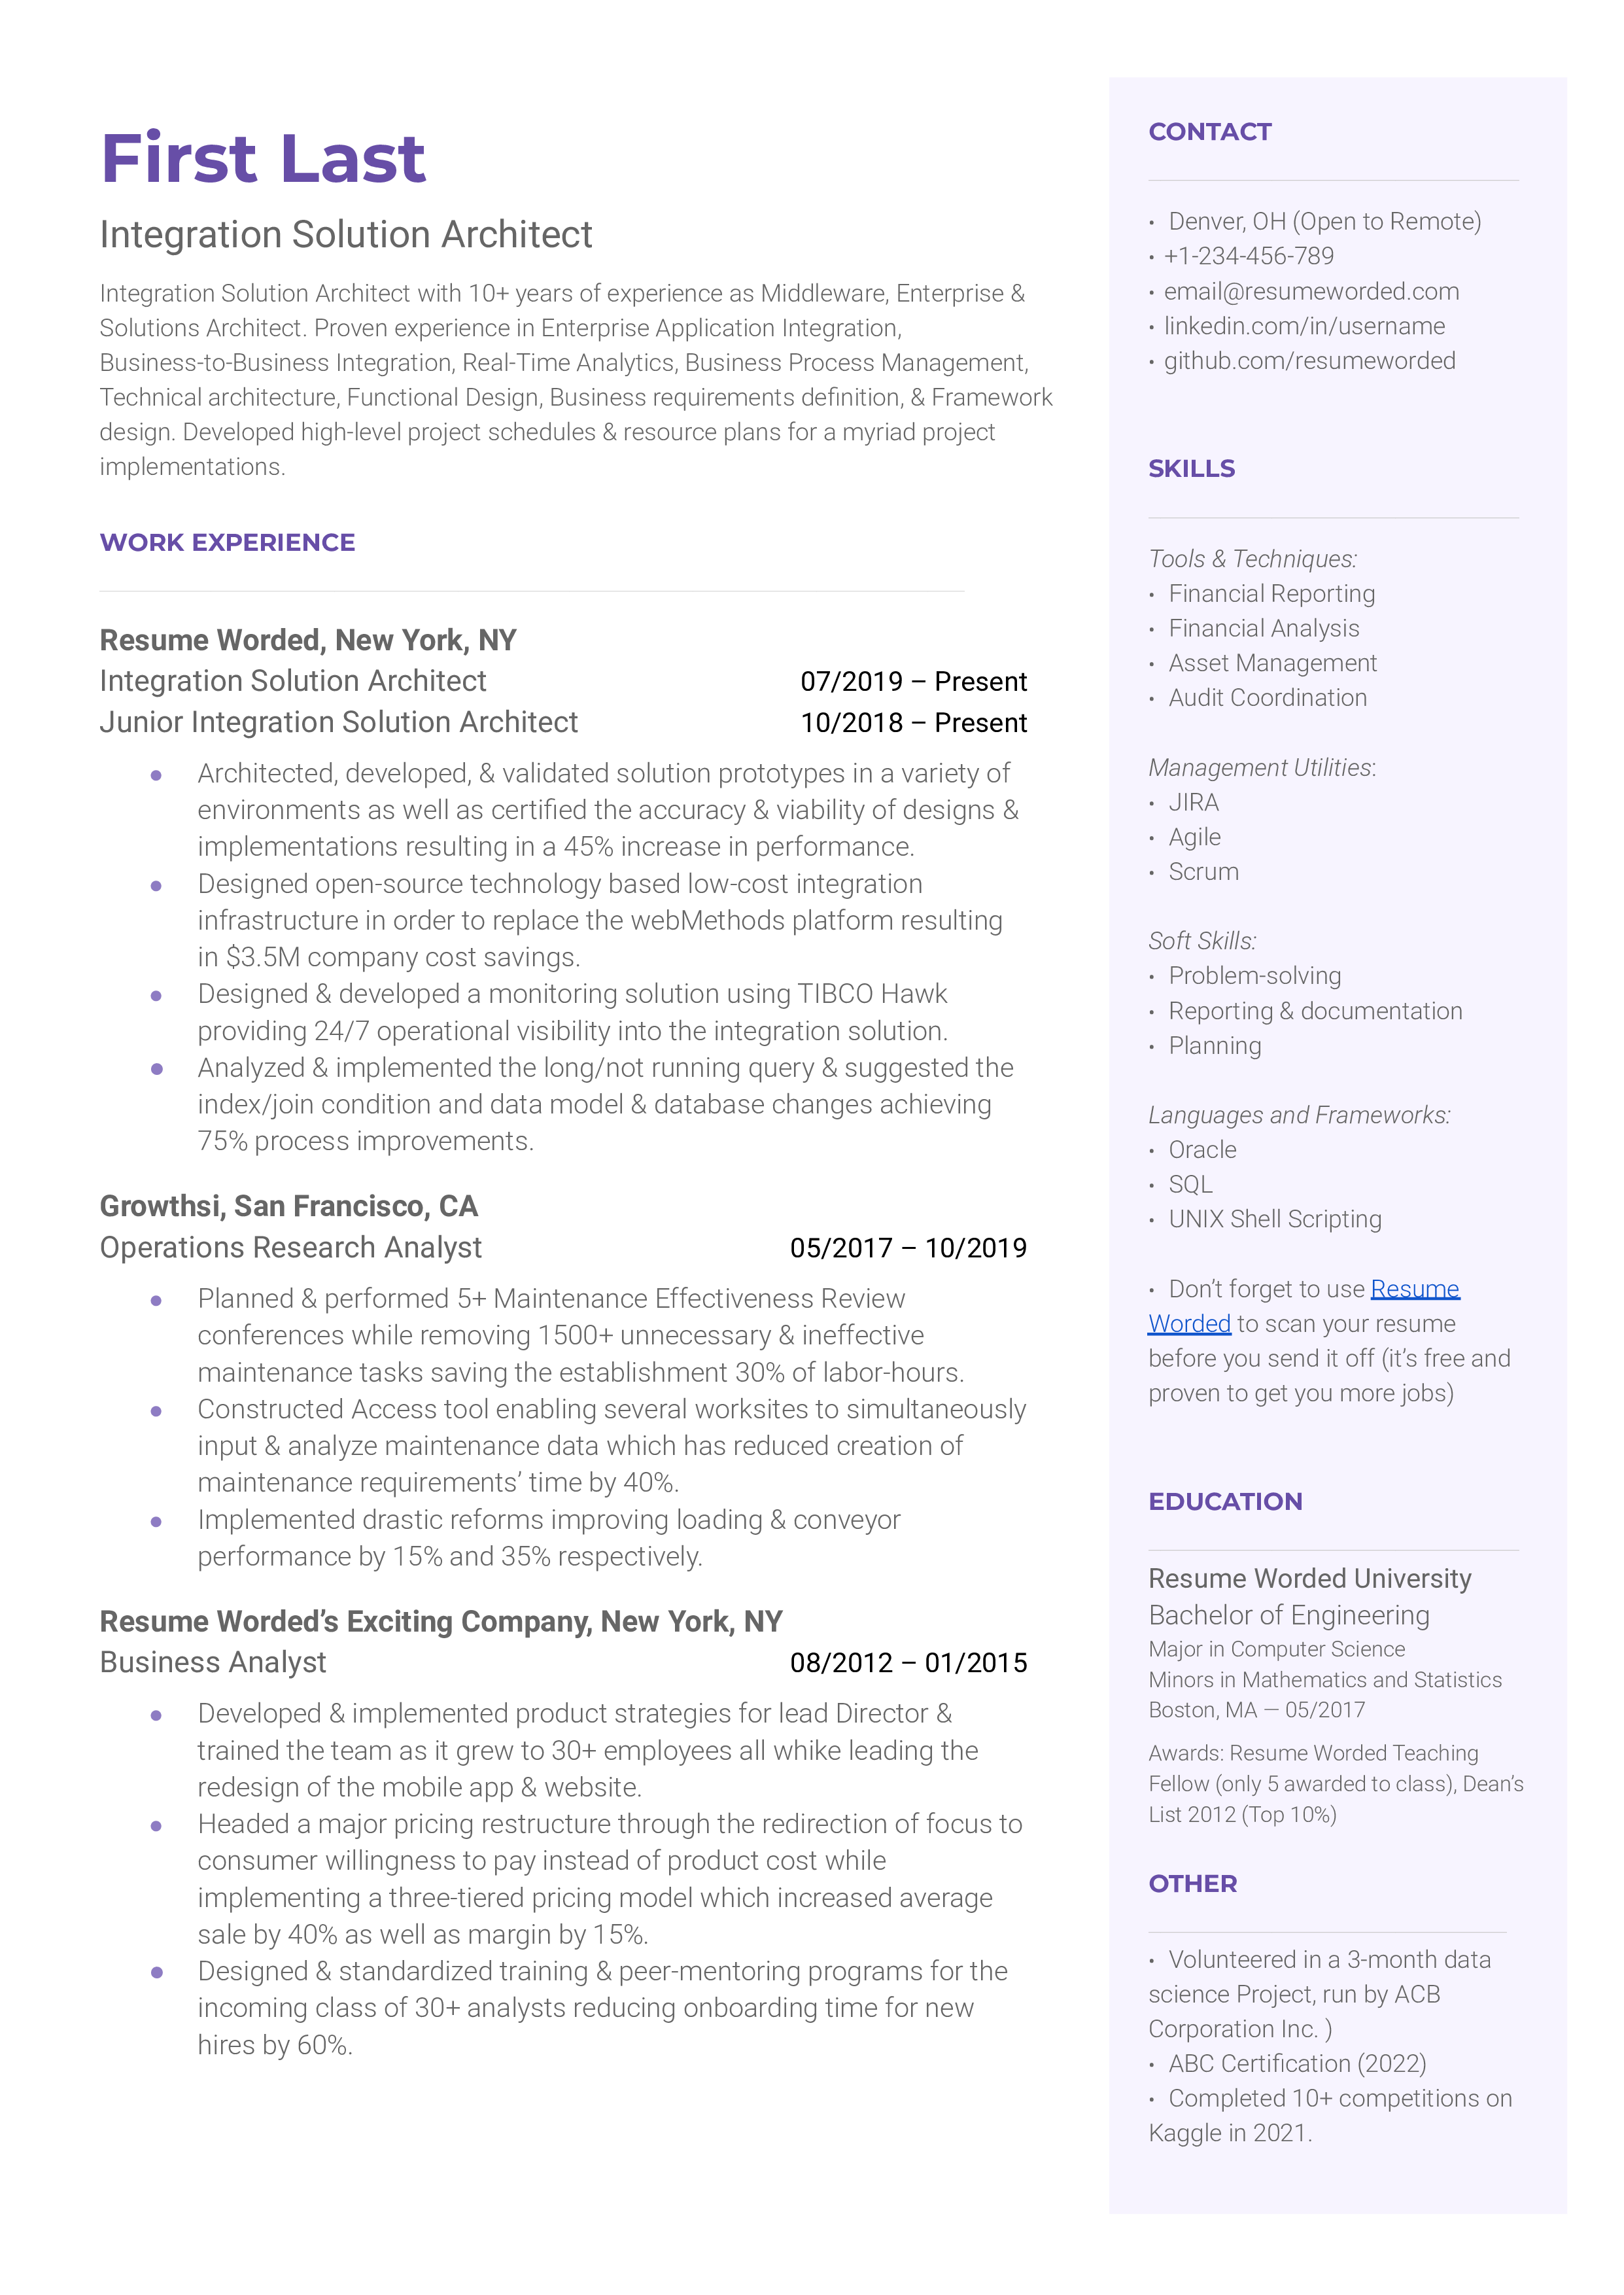 A resume template showing the experience and skillset of an Integration Solution Architect with 10+ years in the industry